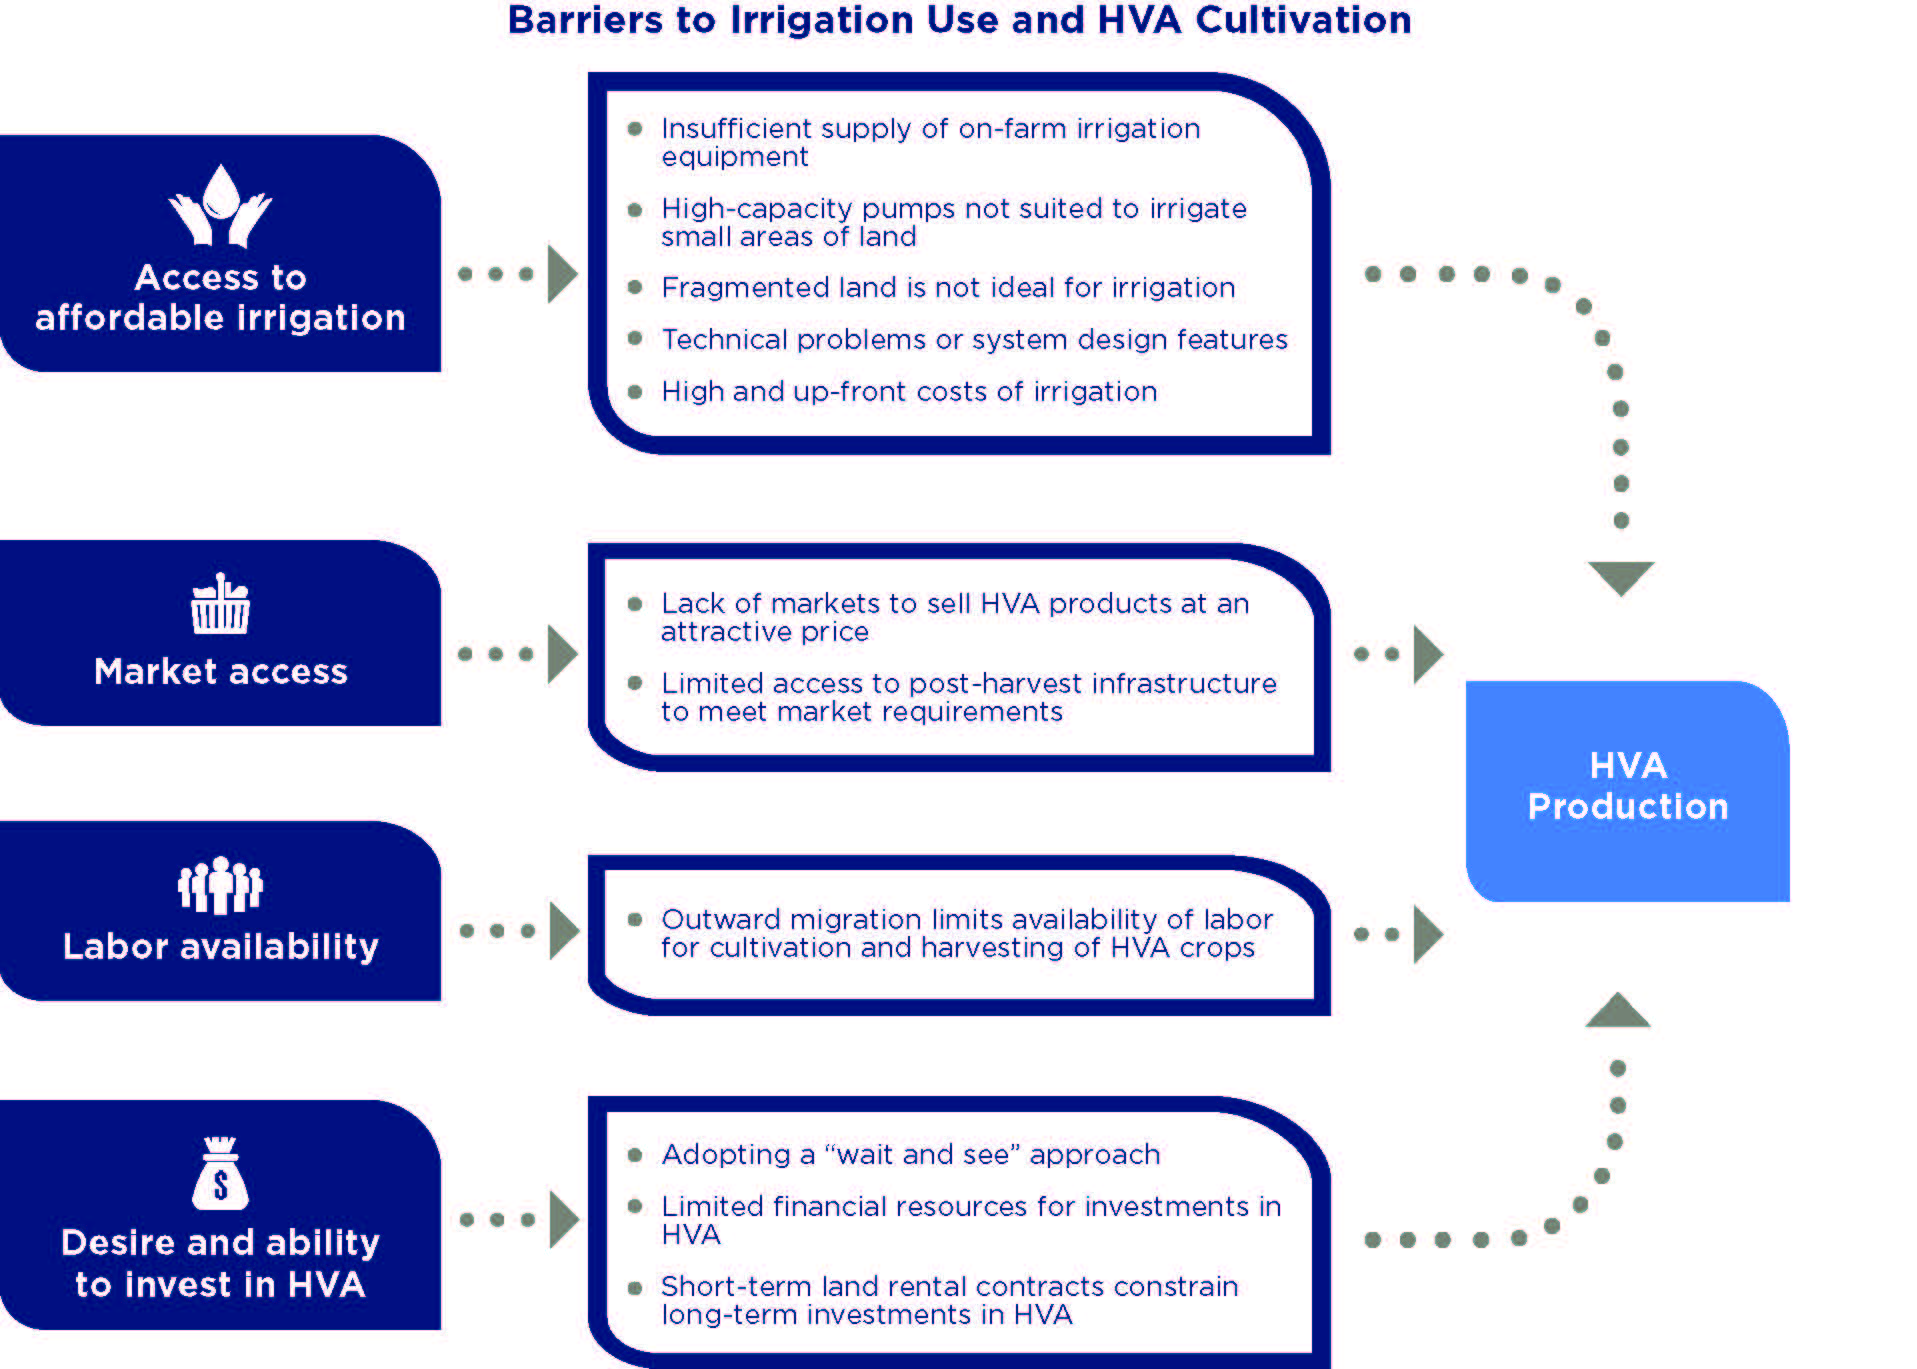 barriers to irrigation use and HVA cultivation